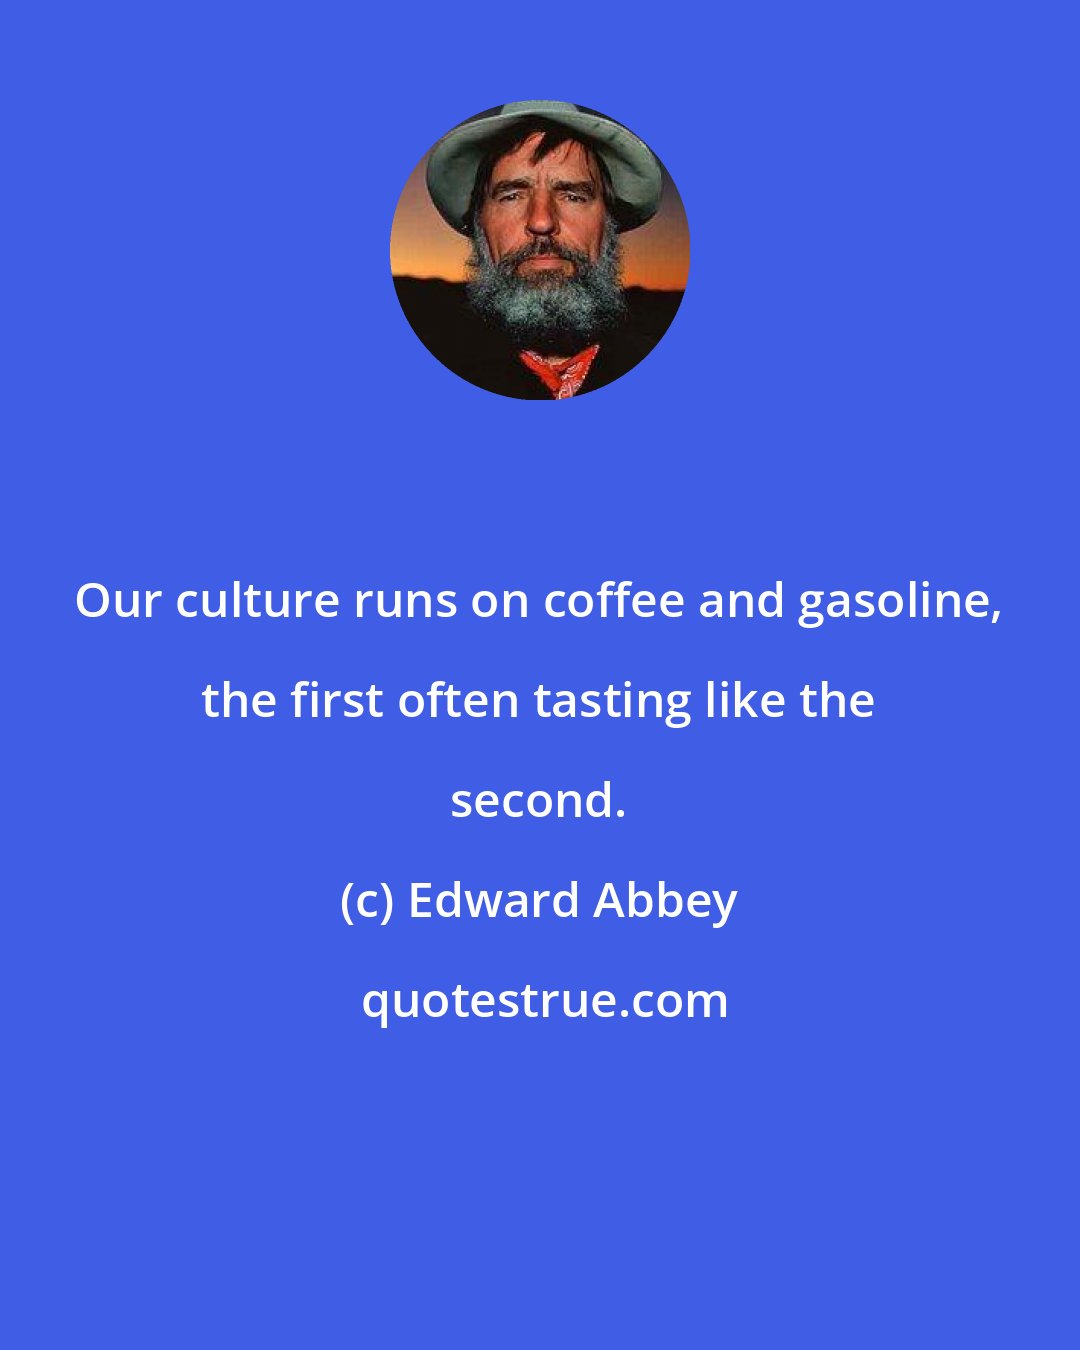 Edward Abbey: Our culture runs on coffee and gasoline, the first often tasting like the second.